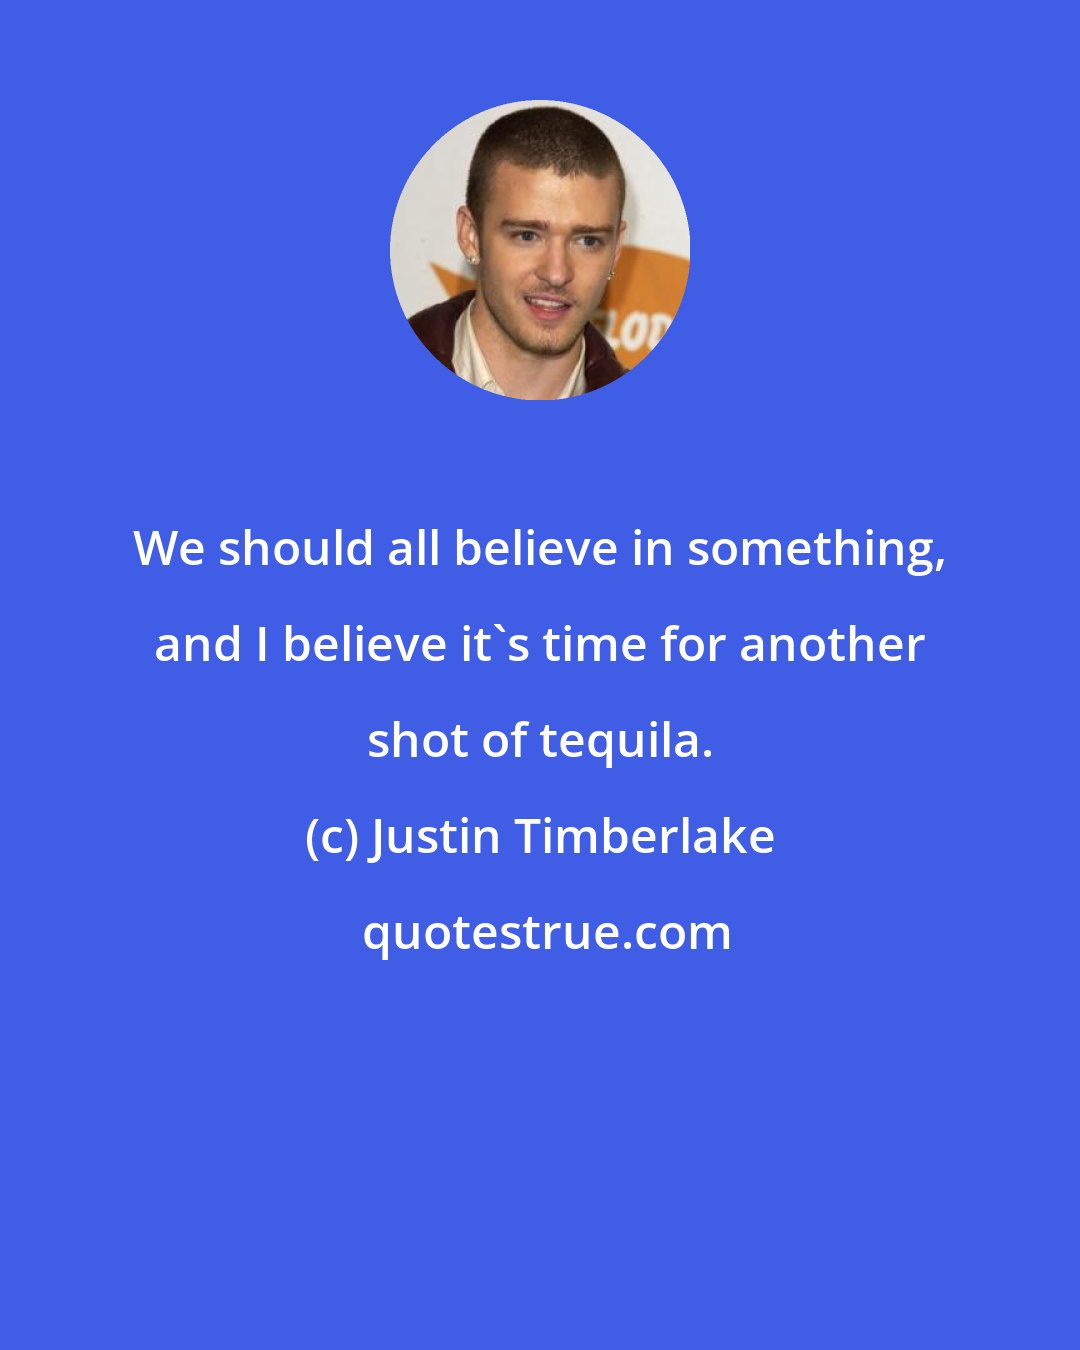 Justin Timberlake: We should all believe in something, and I believe it's time for another shot of tequila.